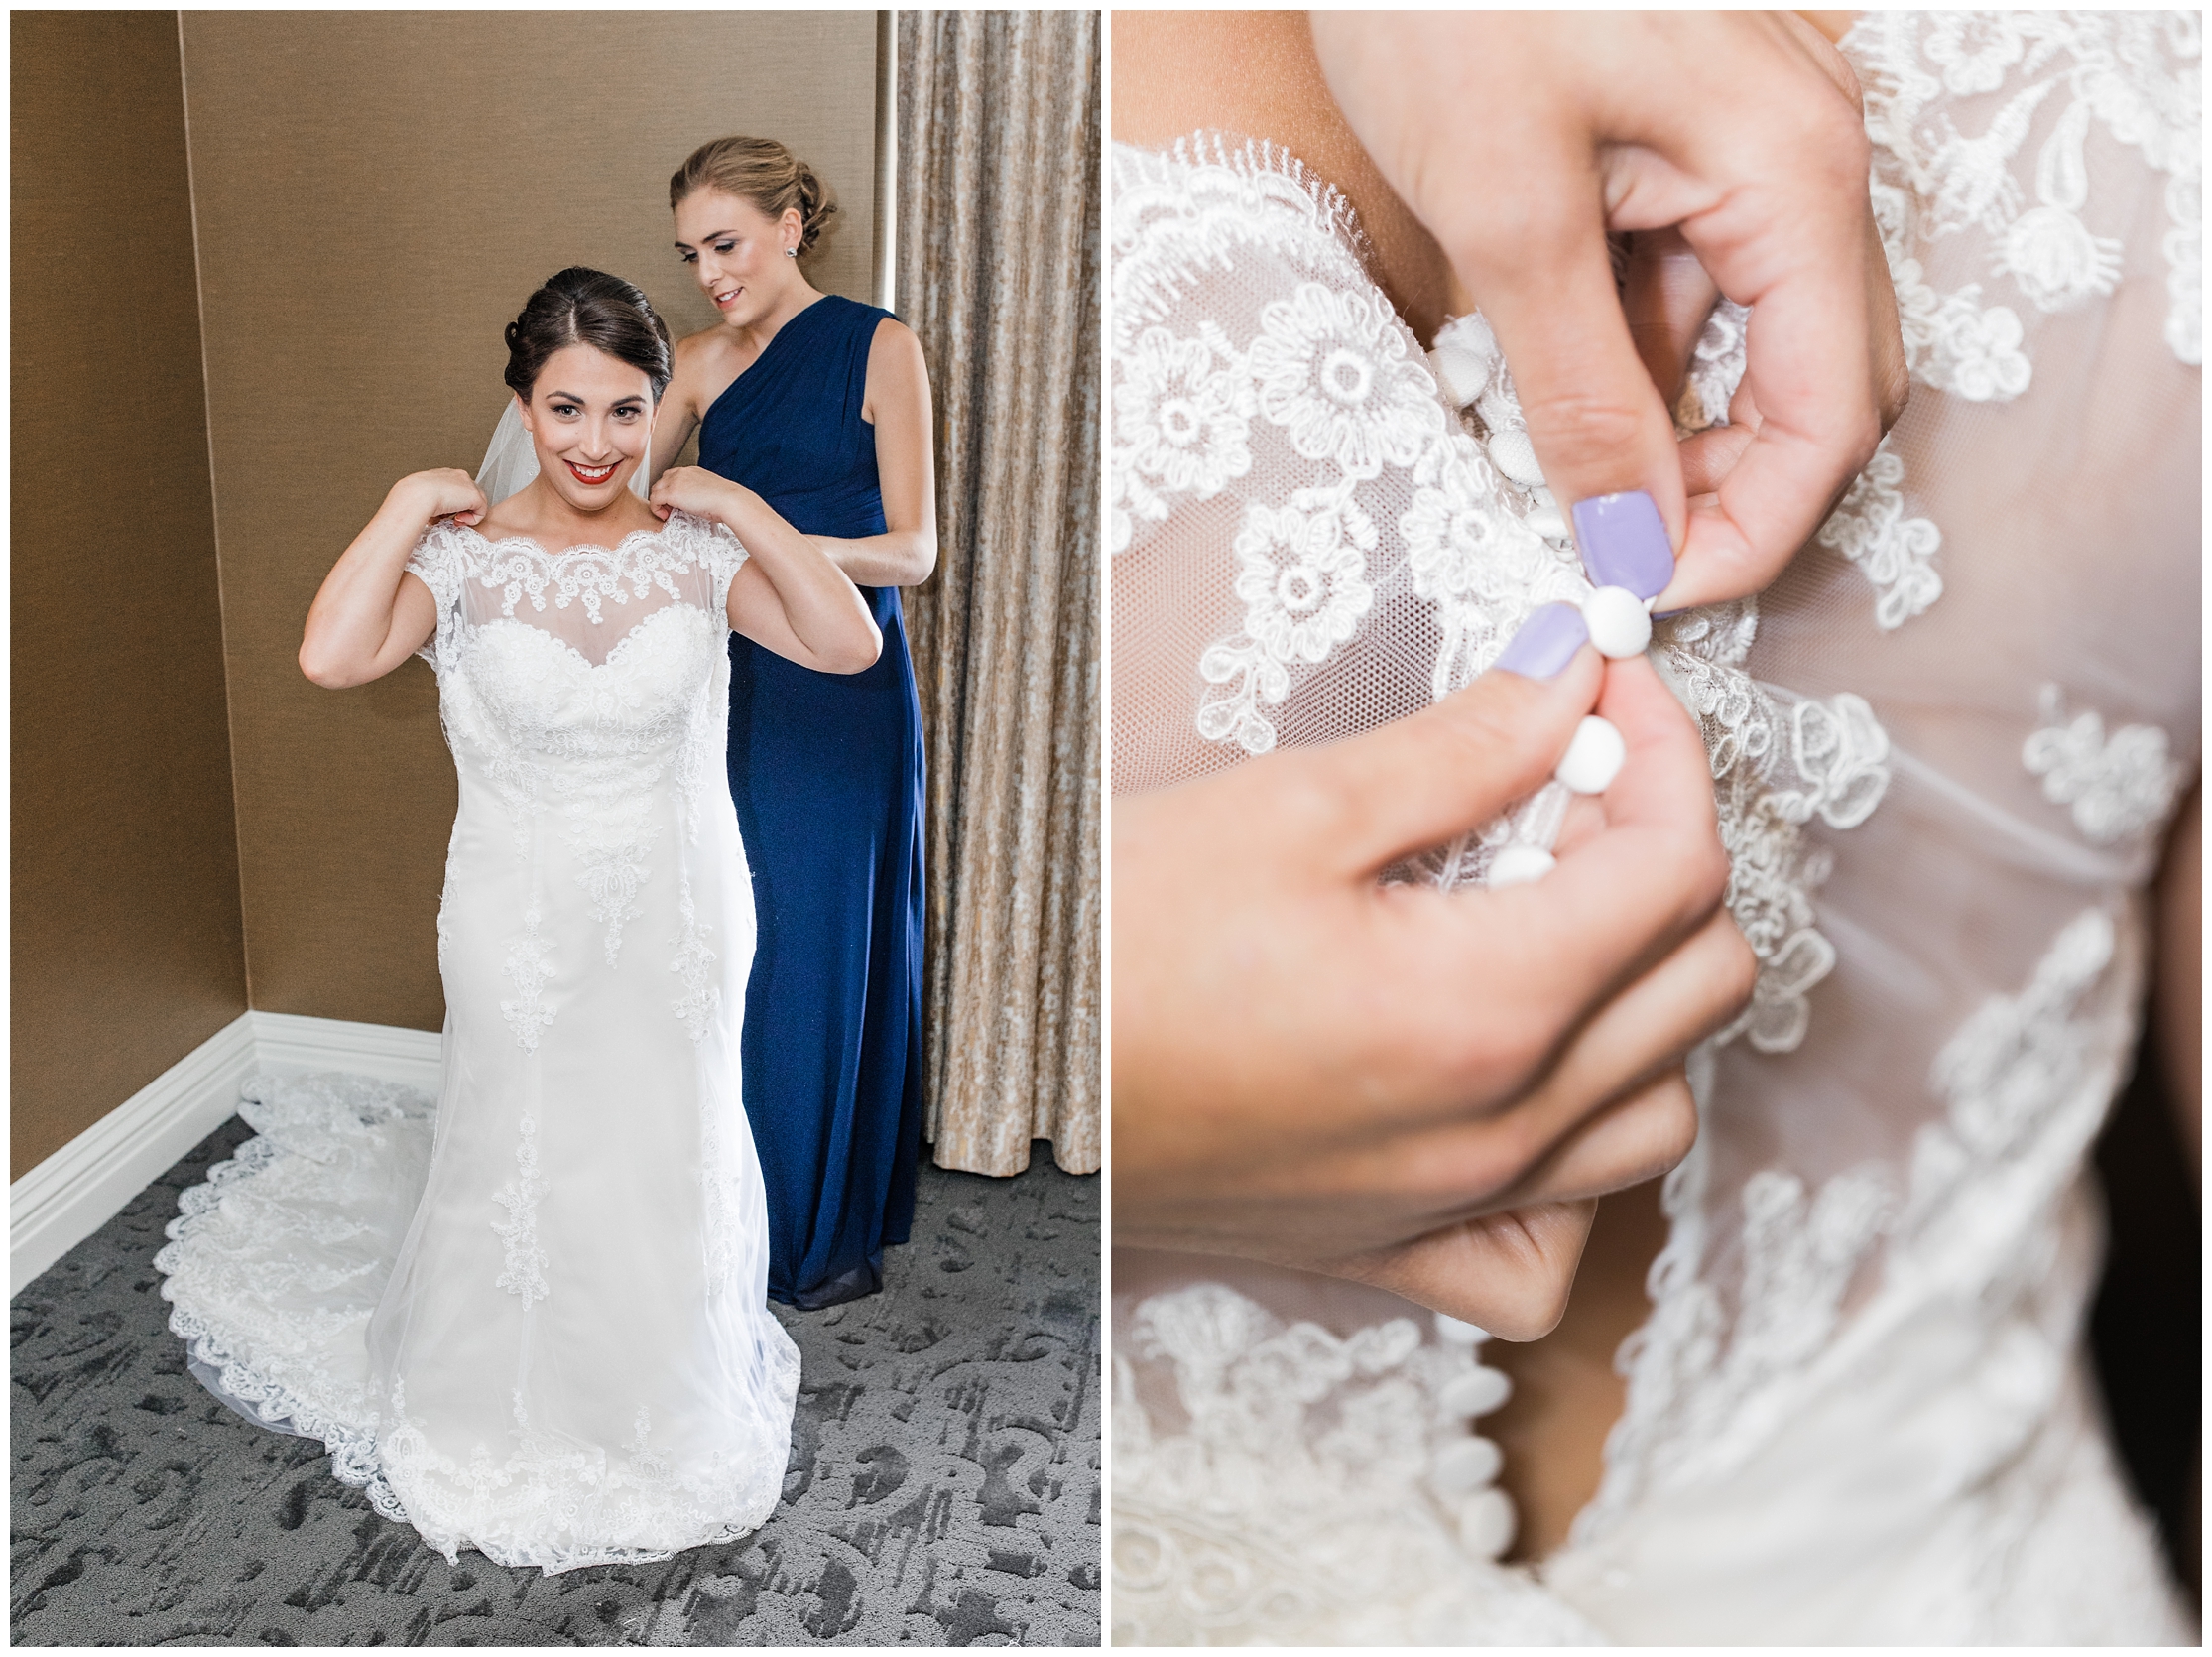 bride getting dressed, button up lace wedding gown, bridal party getting ready, Pittsburgh Hair and Makeup, Wedding bands, wedding day details, pittsburgh wedding details, pittsburgh wedding photographer,